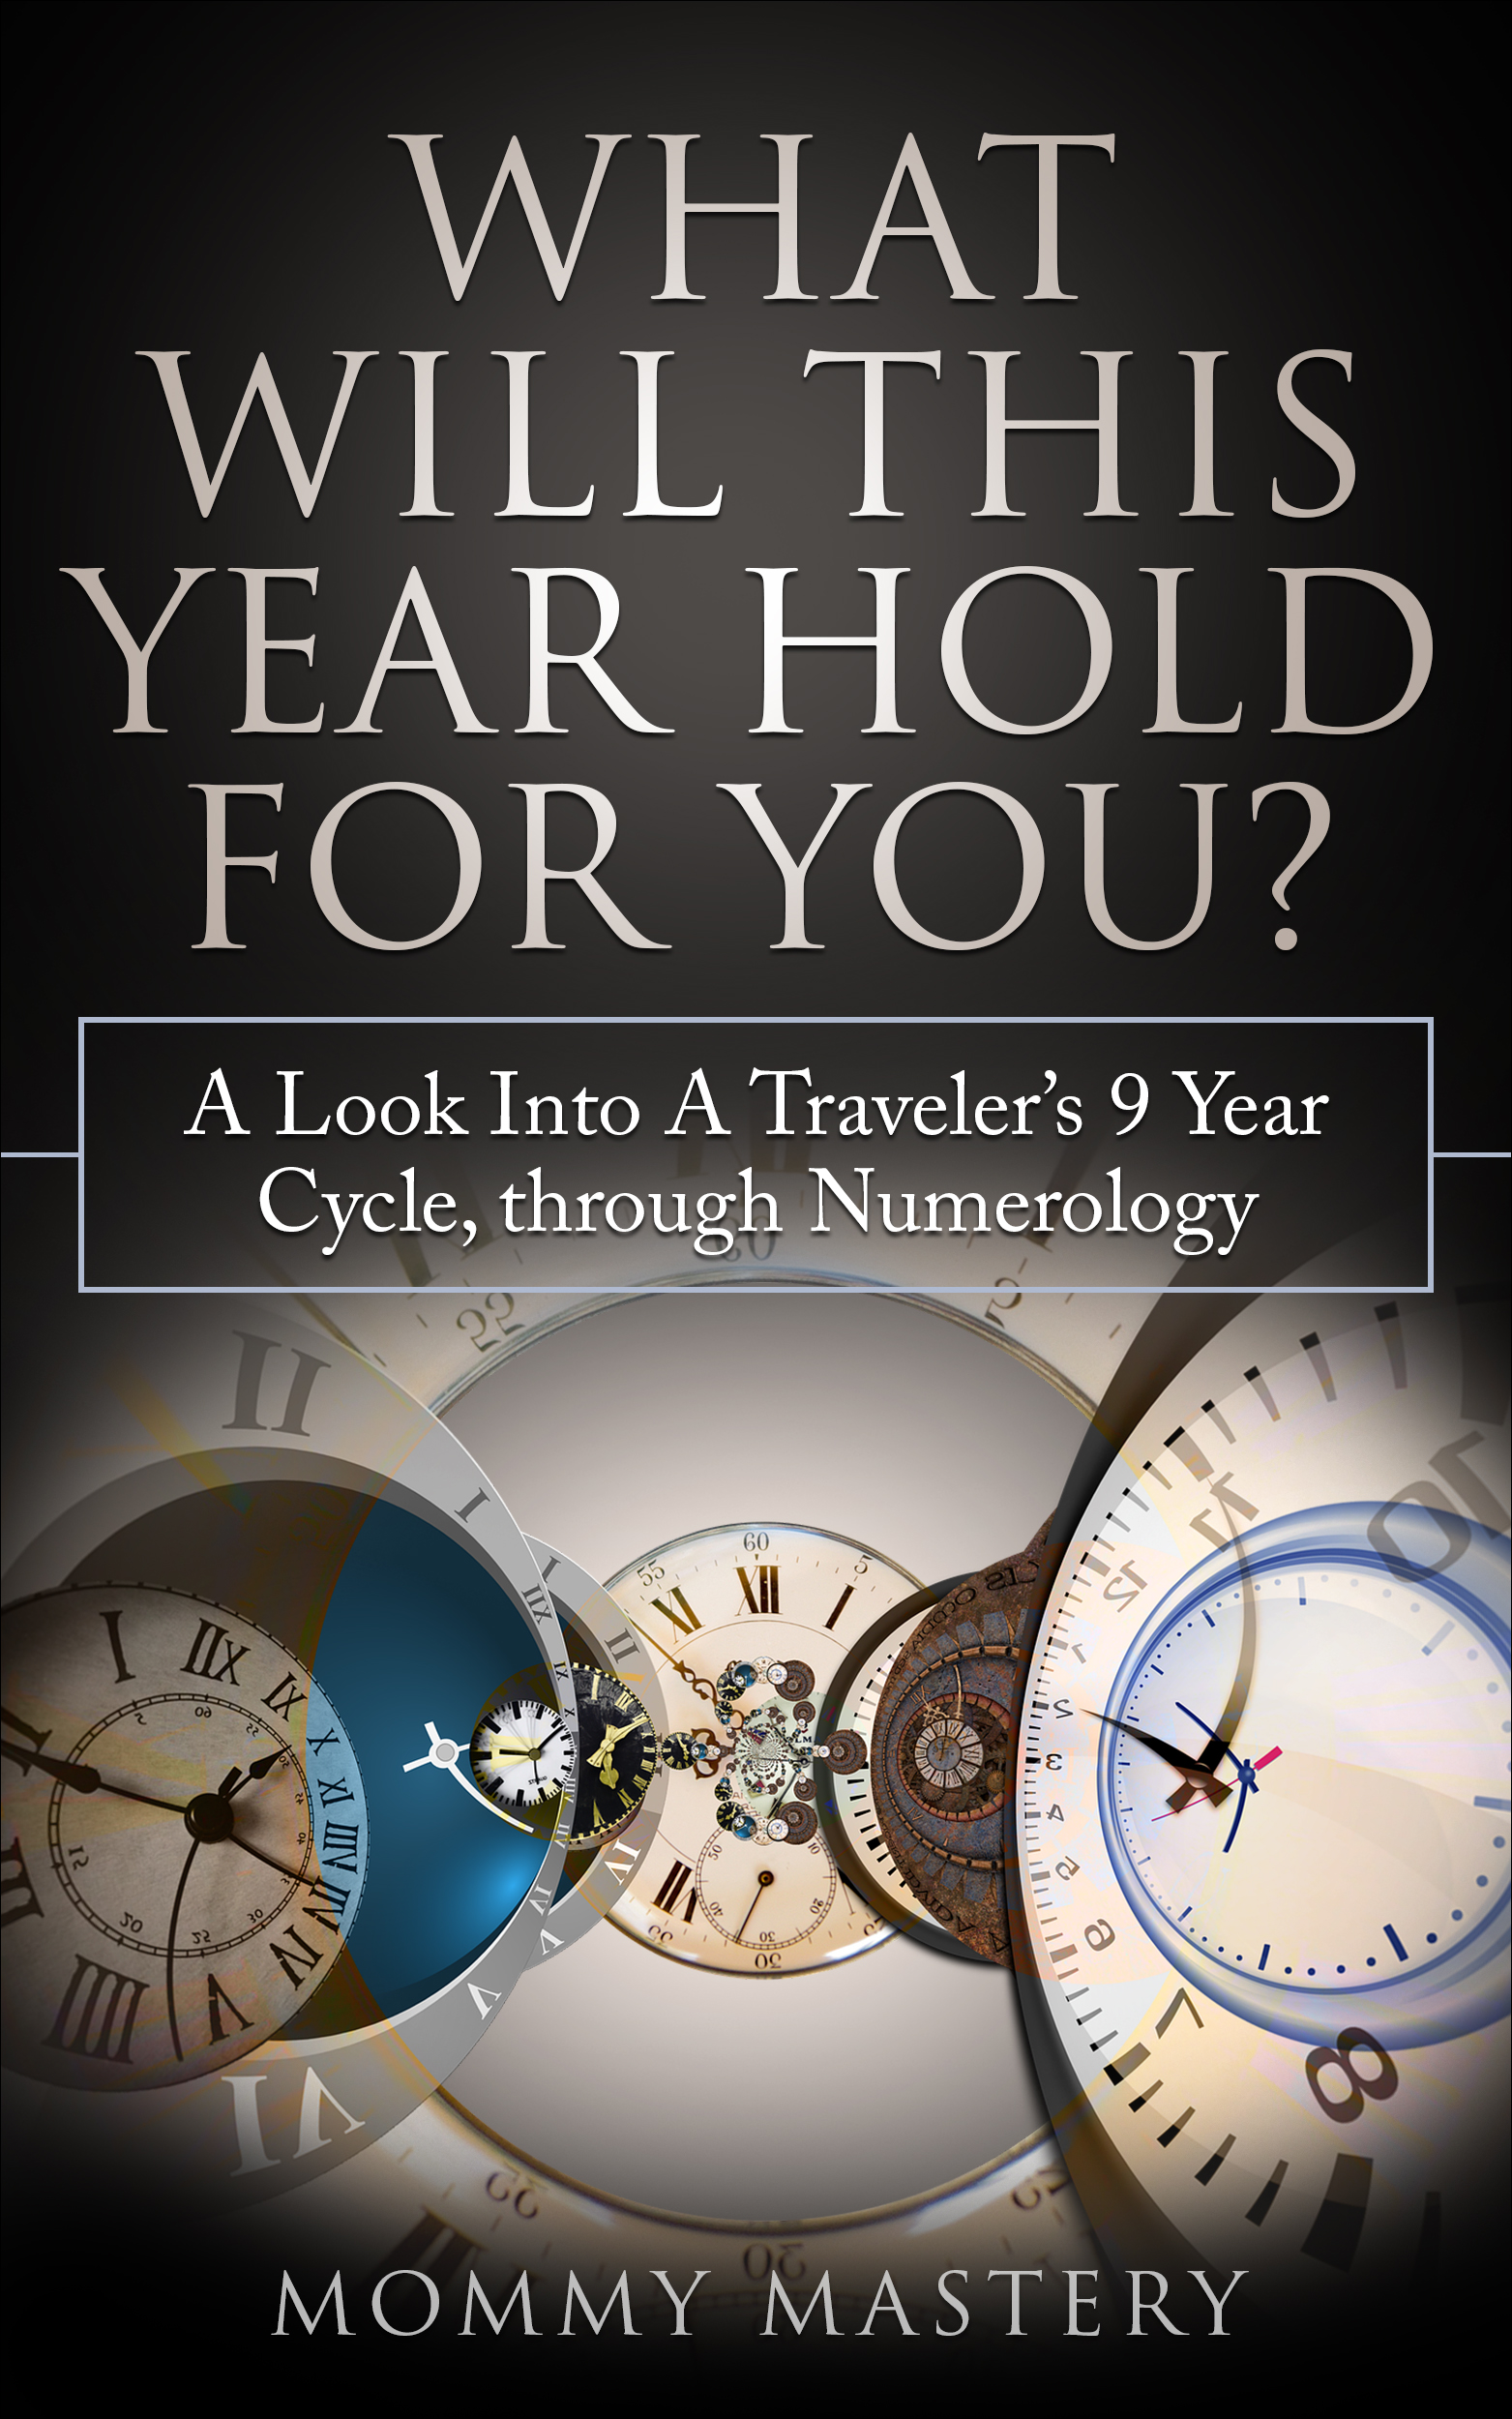 FREE: What will this year hold for you? by mommy mastery